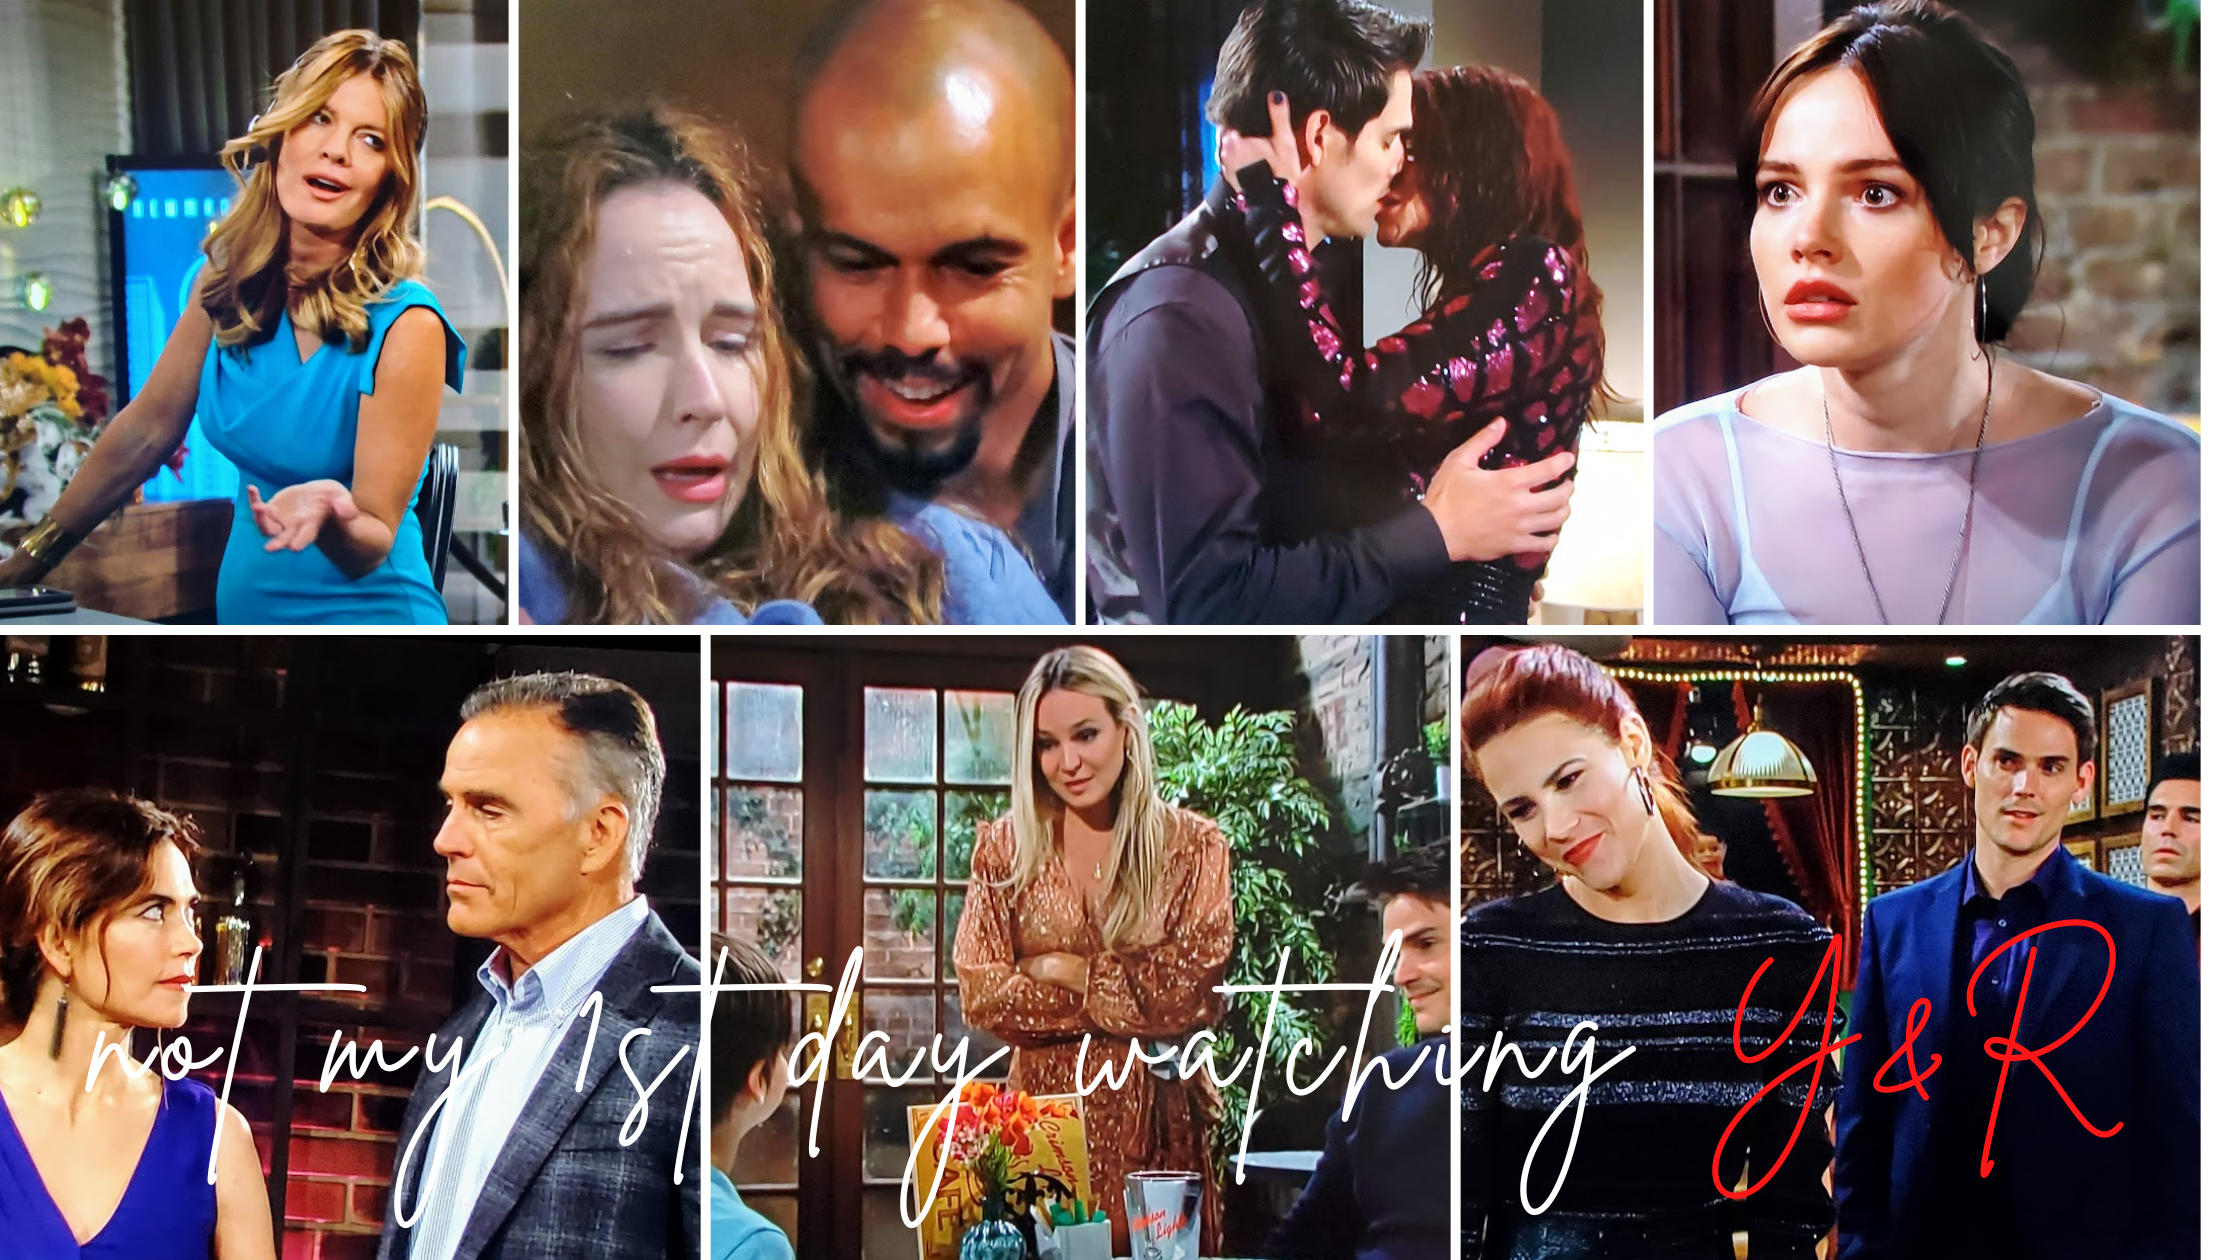 Love in Genoa City, WI on The Young & the Restless